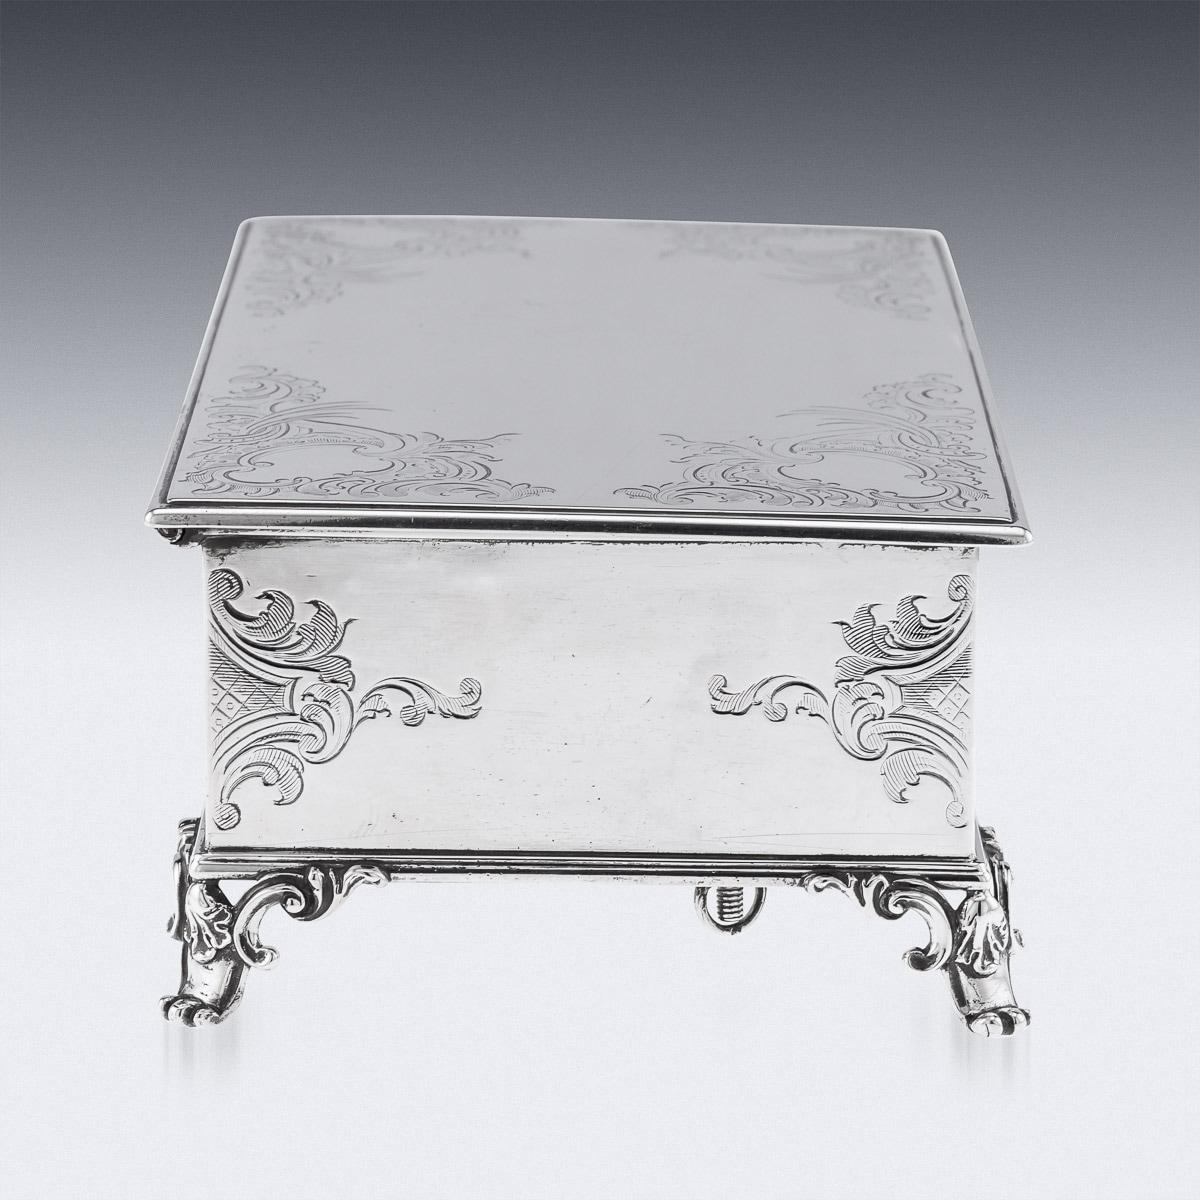 19th Century, Victorian Solid Silver Inkstand, Robert Hennell, c.1850 For Sale 3